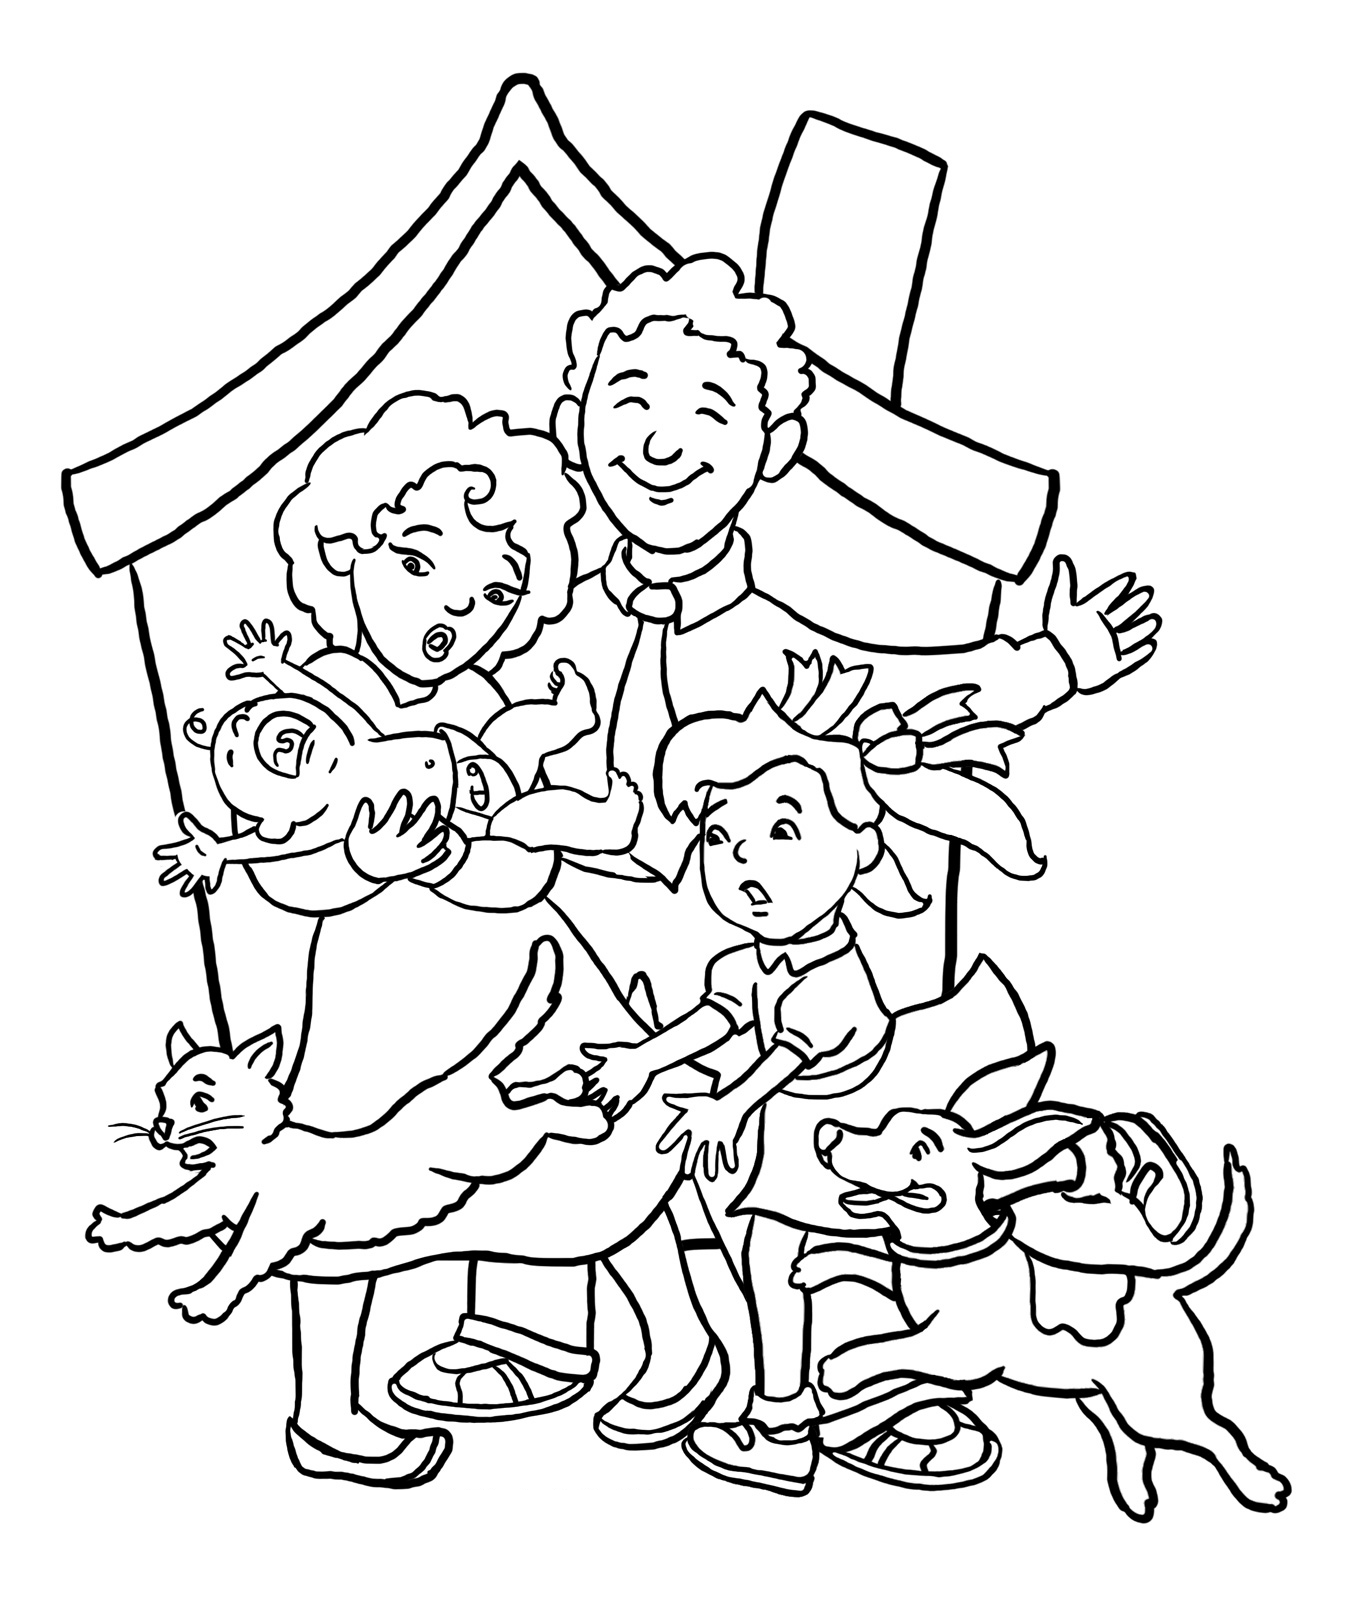 Crazy Family Coloring Page